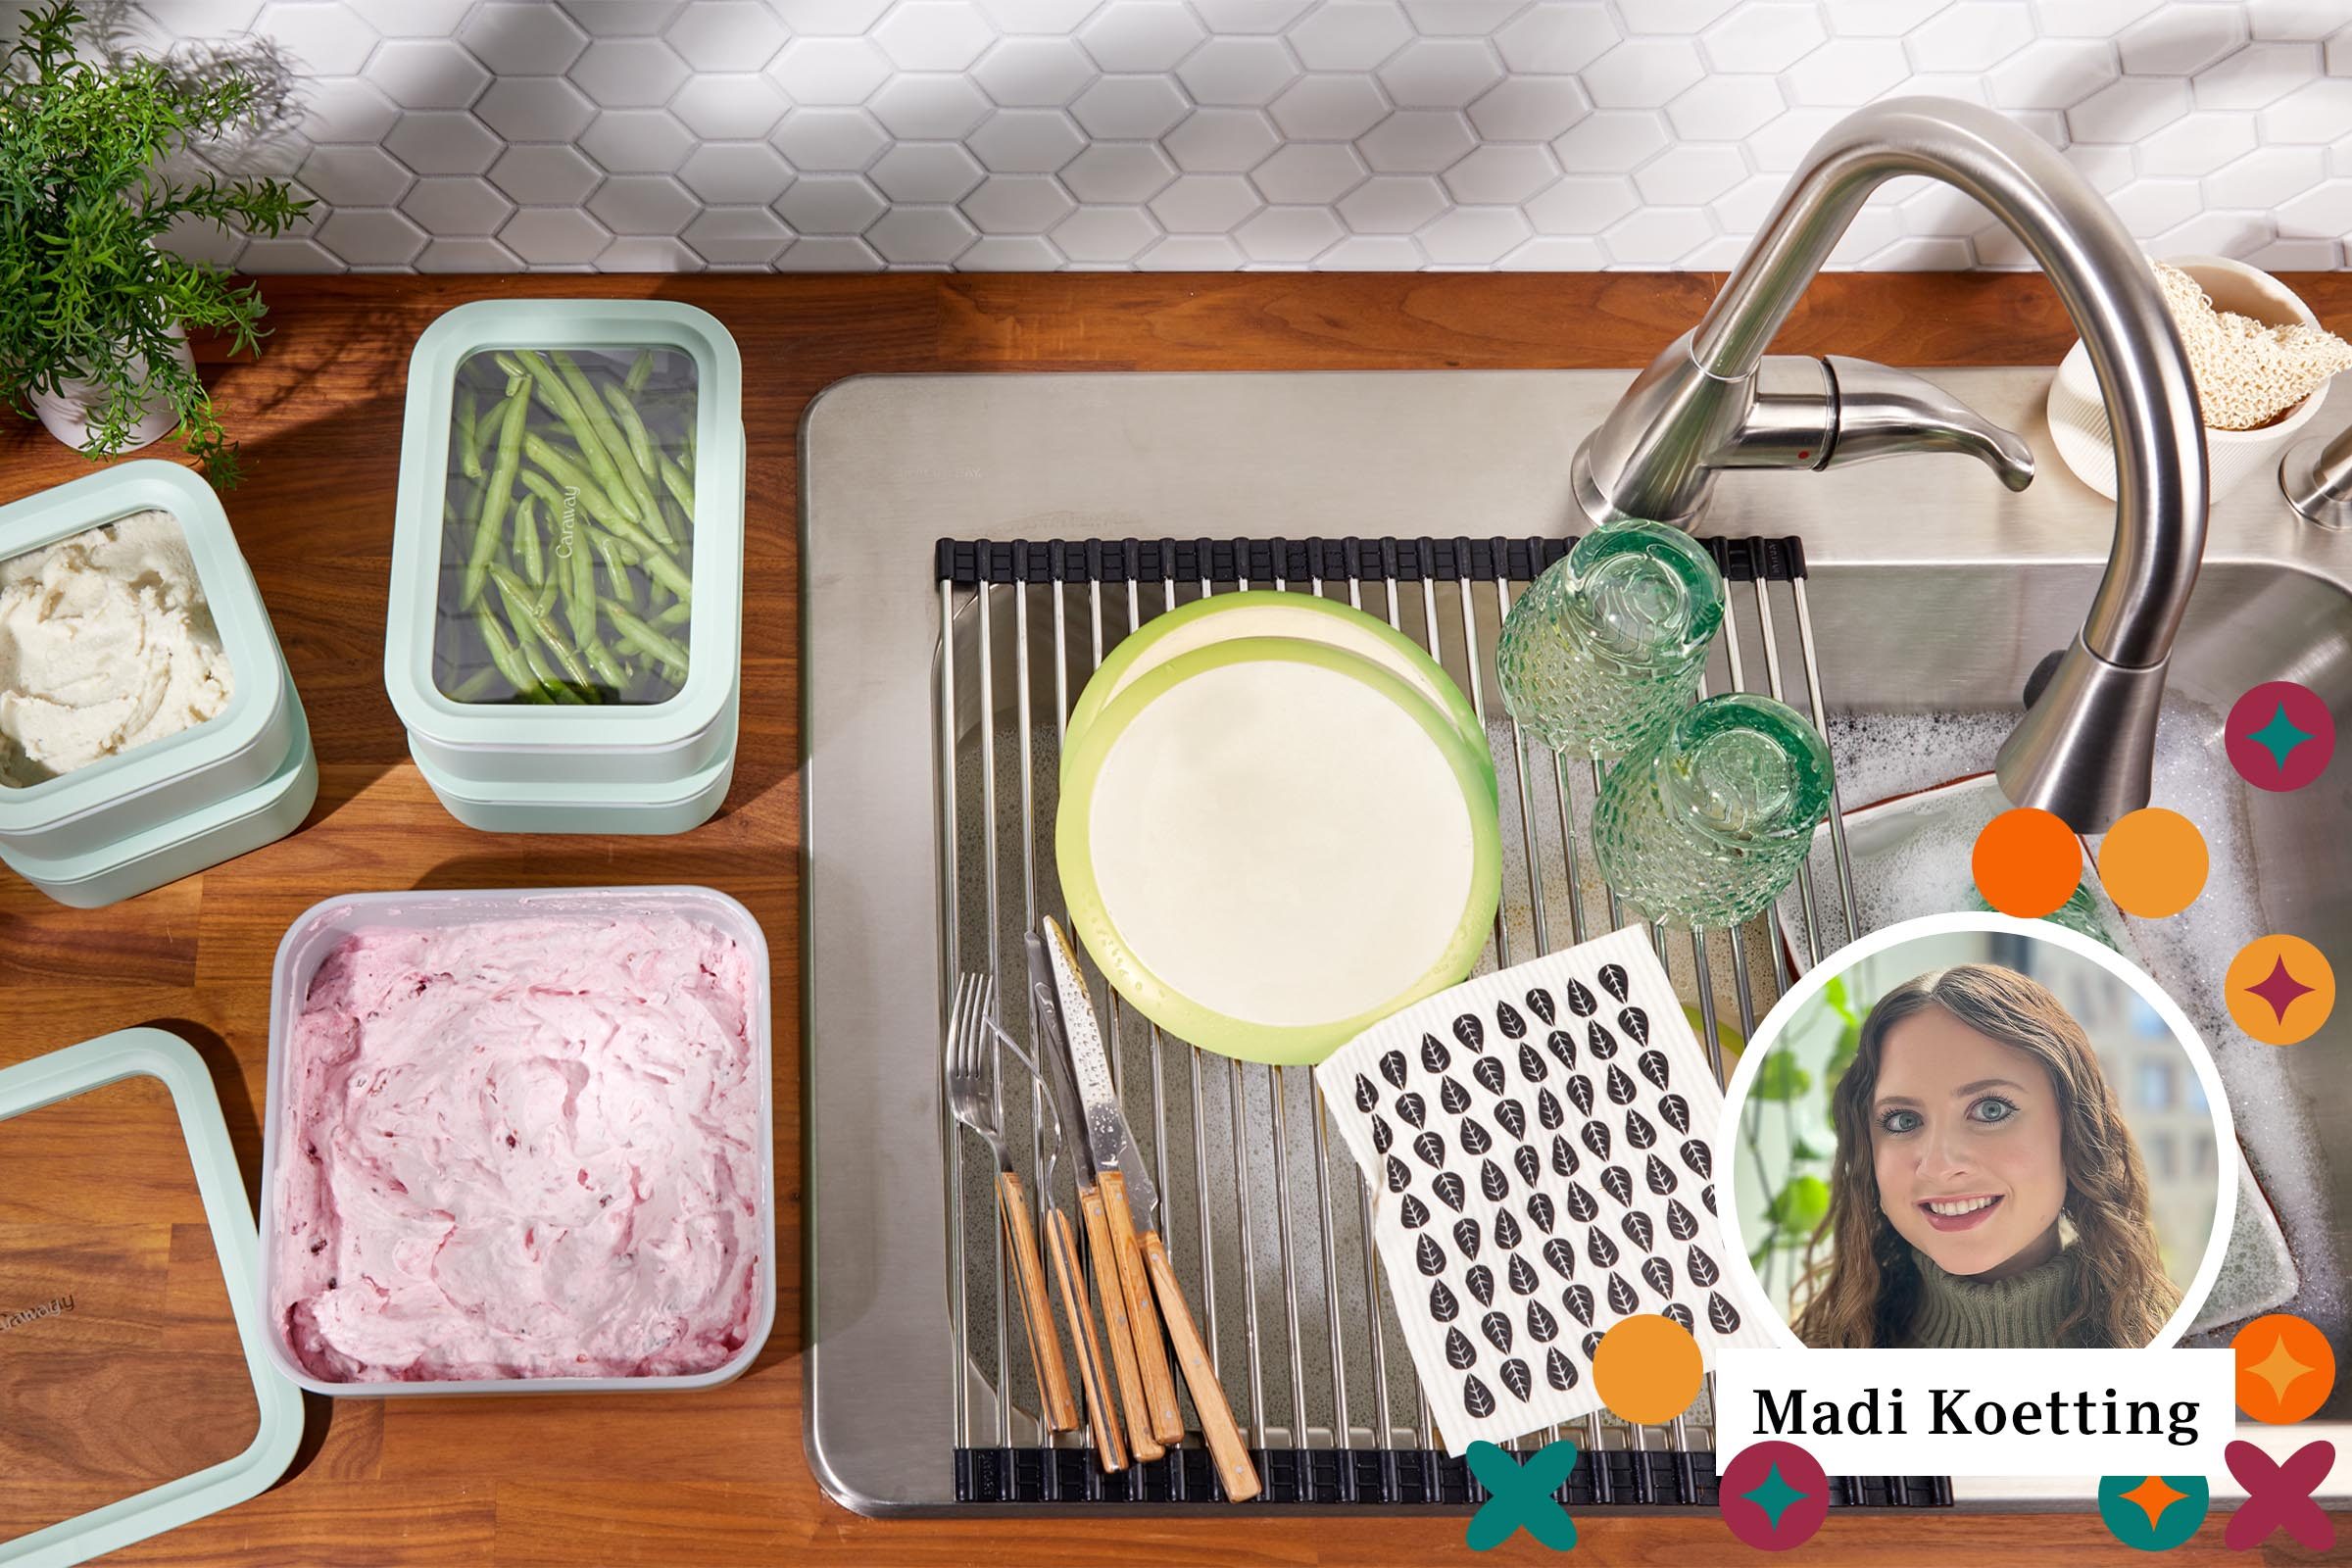 https://www.tasteofhome.com/wp-content/uploads/2023/09/TOH-Thanksgiving-Essentials-4-Madi-Koetting-Cleanup.jpg